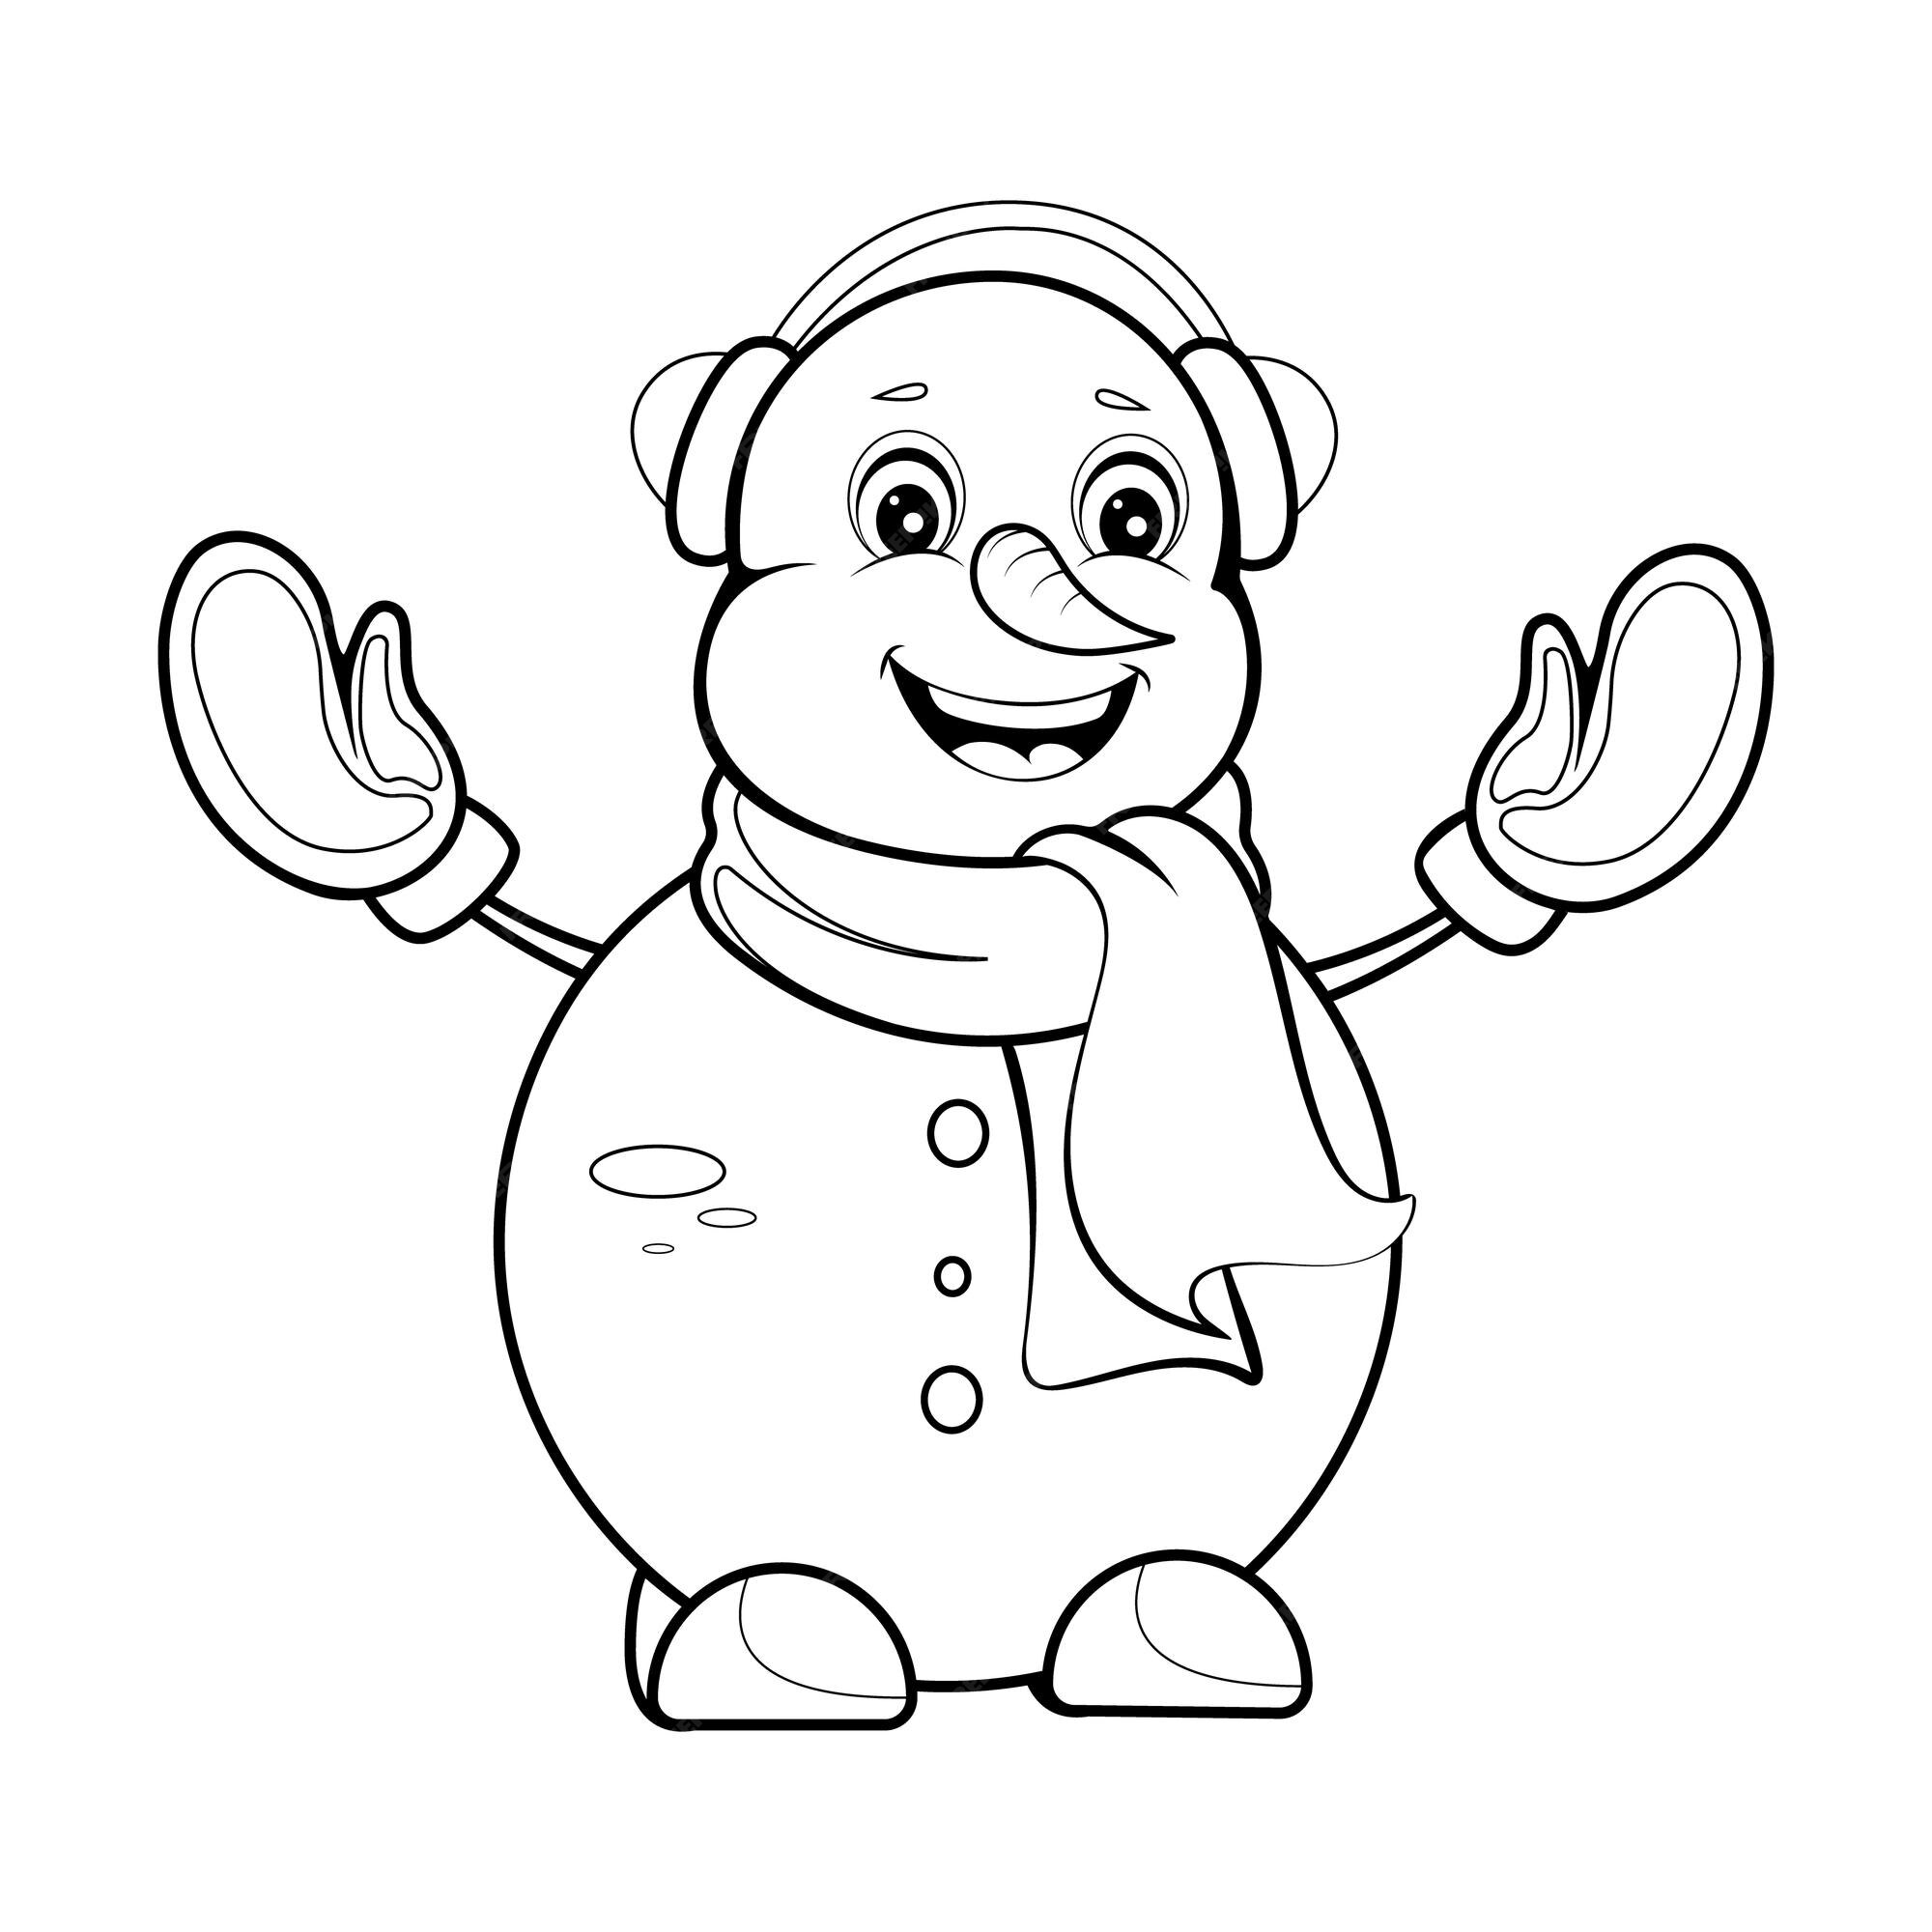 Premium vector coloring page happy snowman with winter earmuffs gloves and scarf